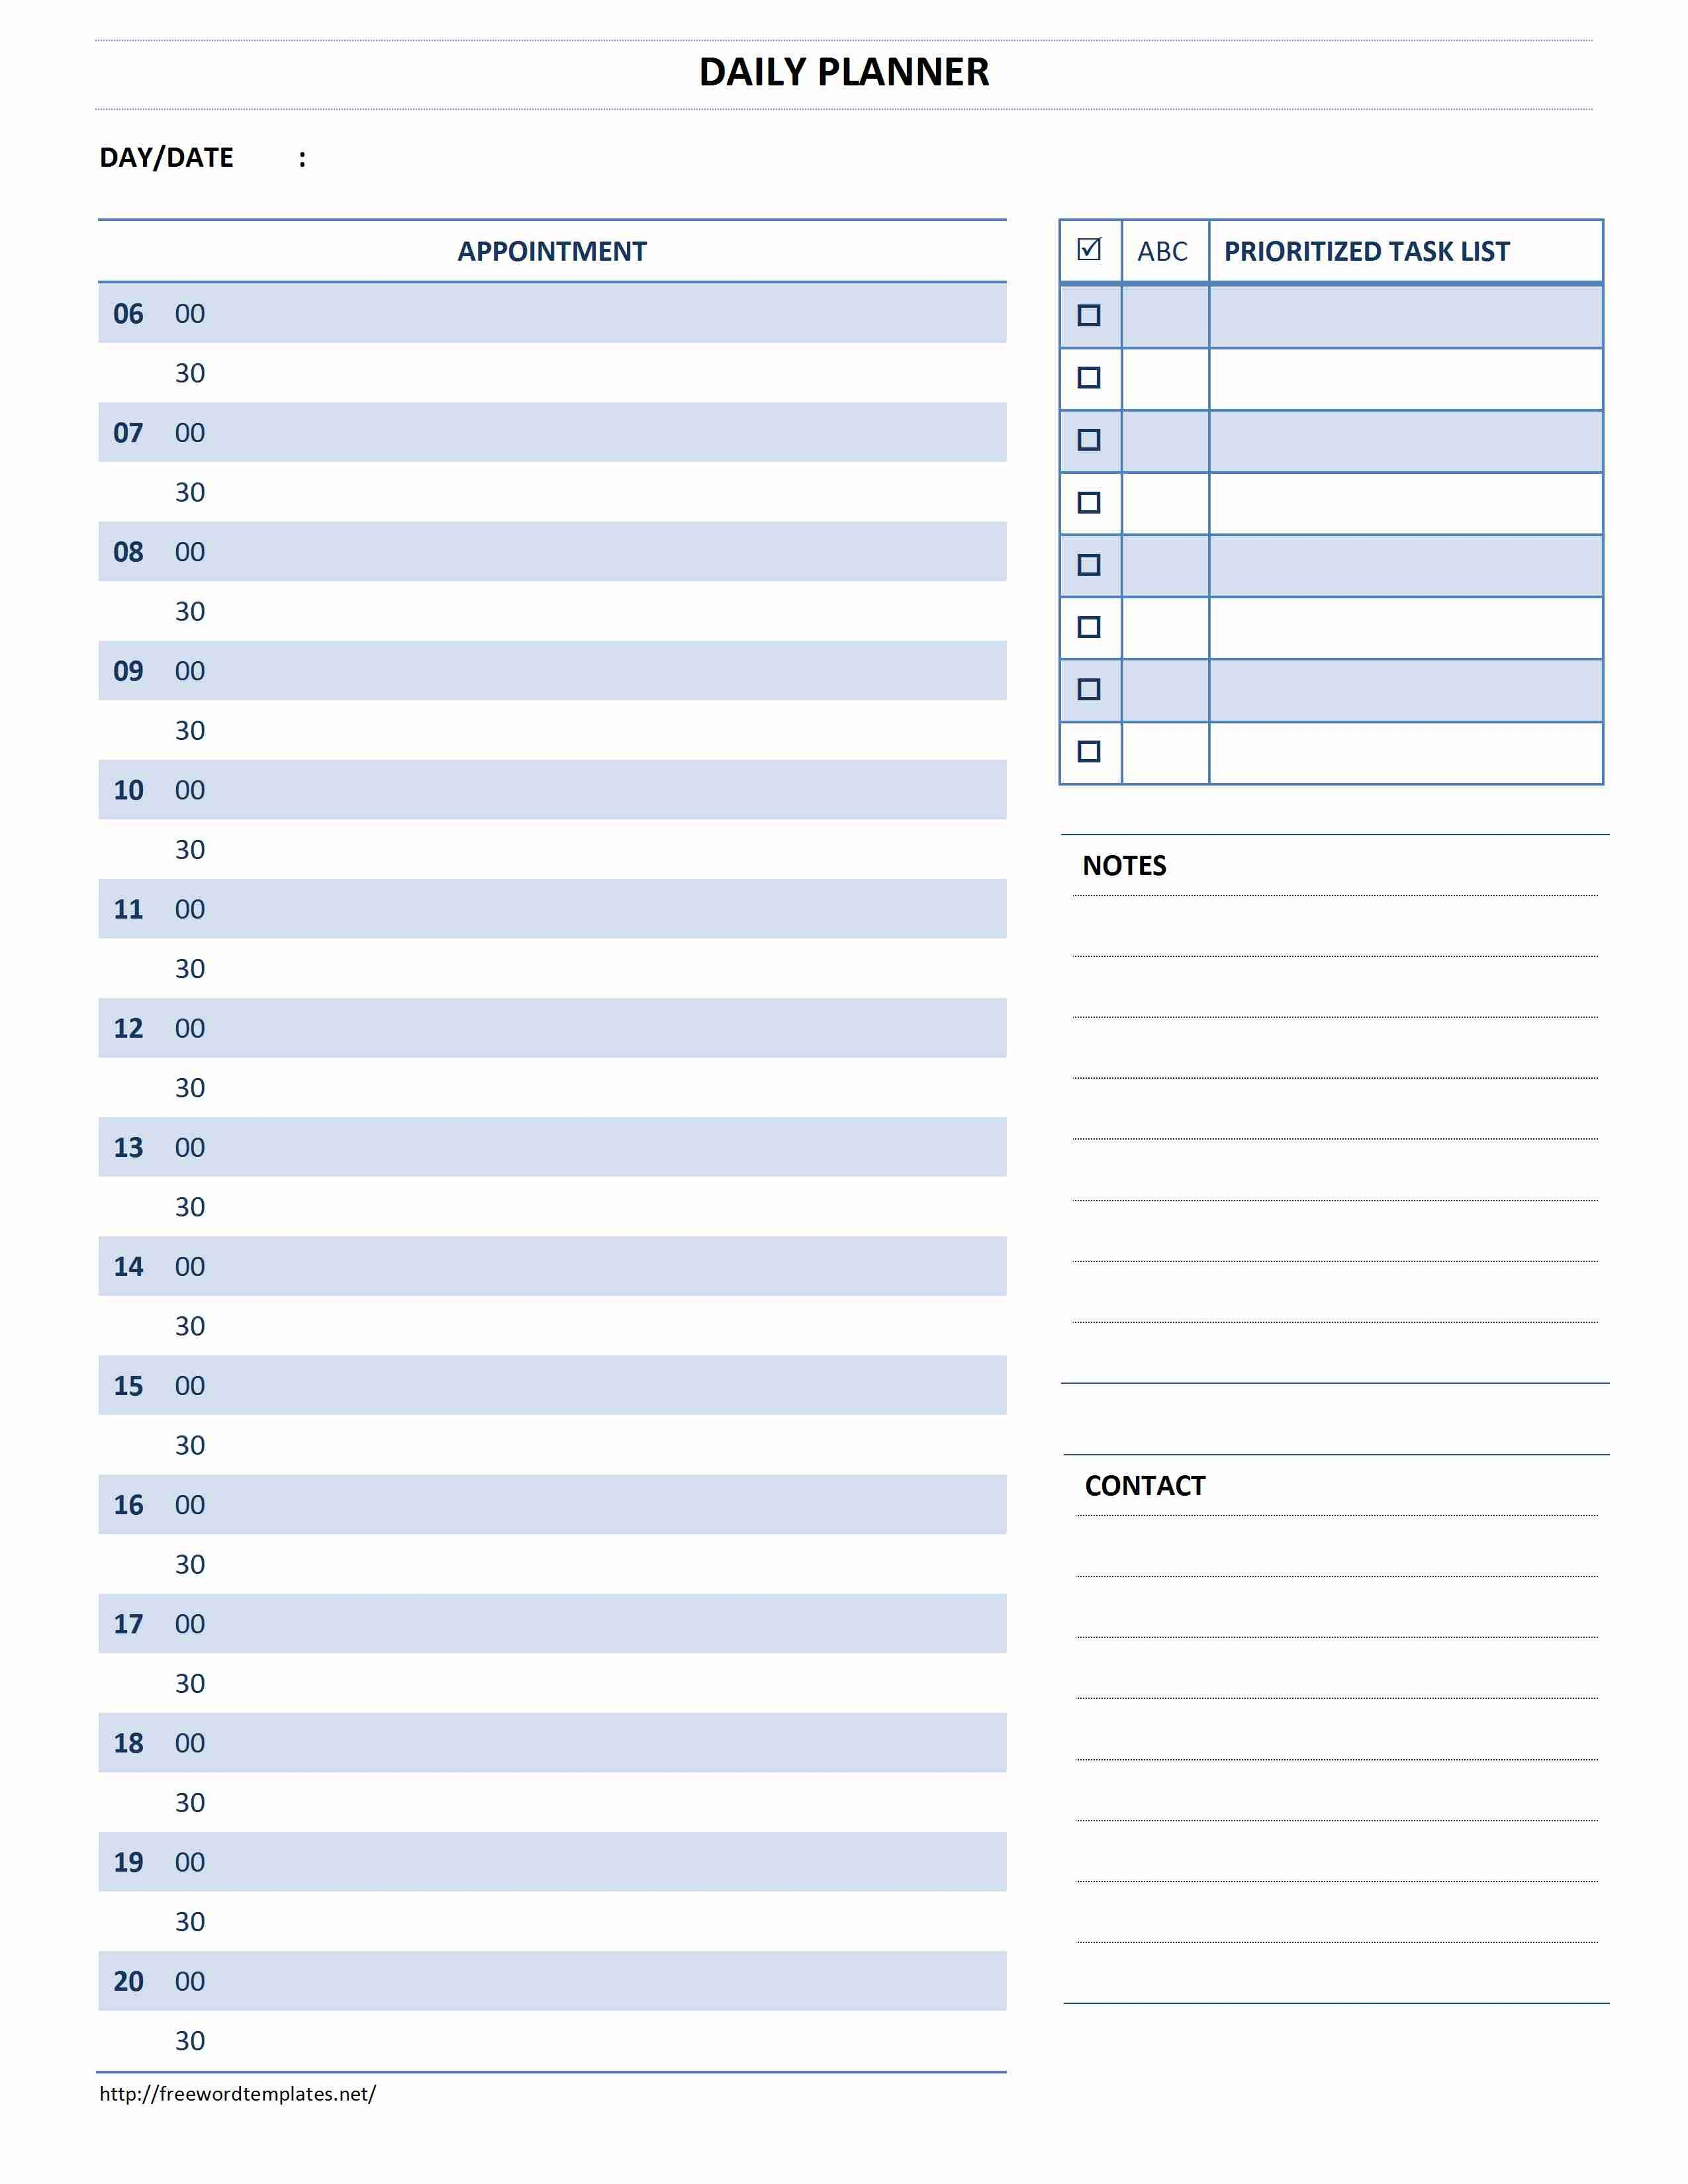 026 Free Daily Calendar Template Printable With Time Slots throughout Daily Planner With Time Slots Printable